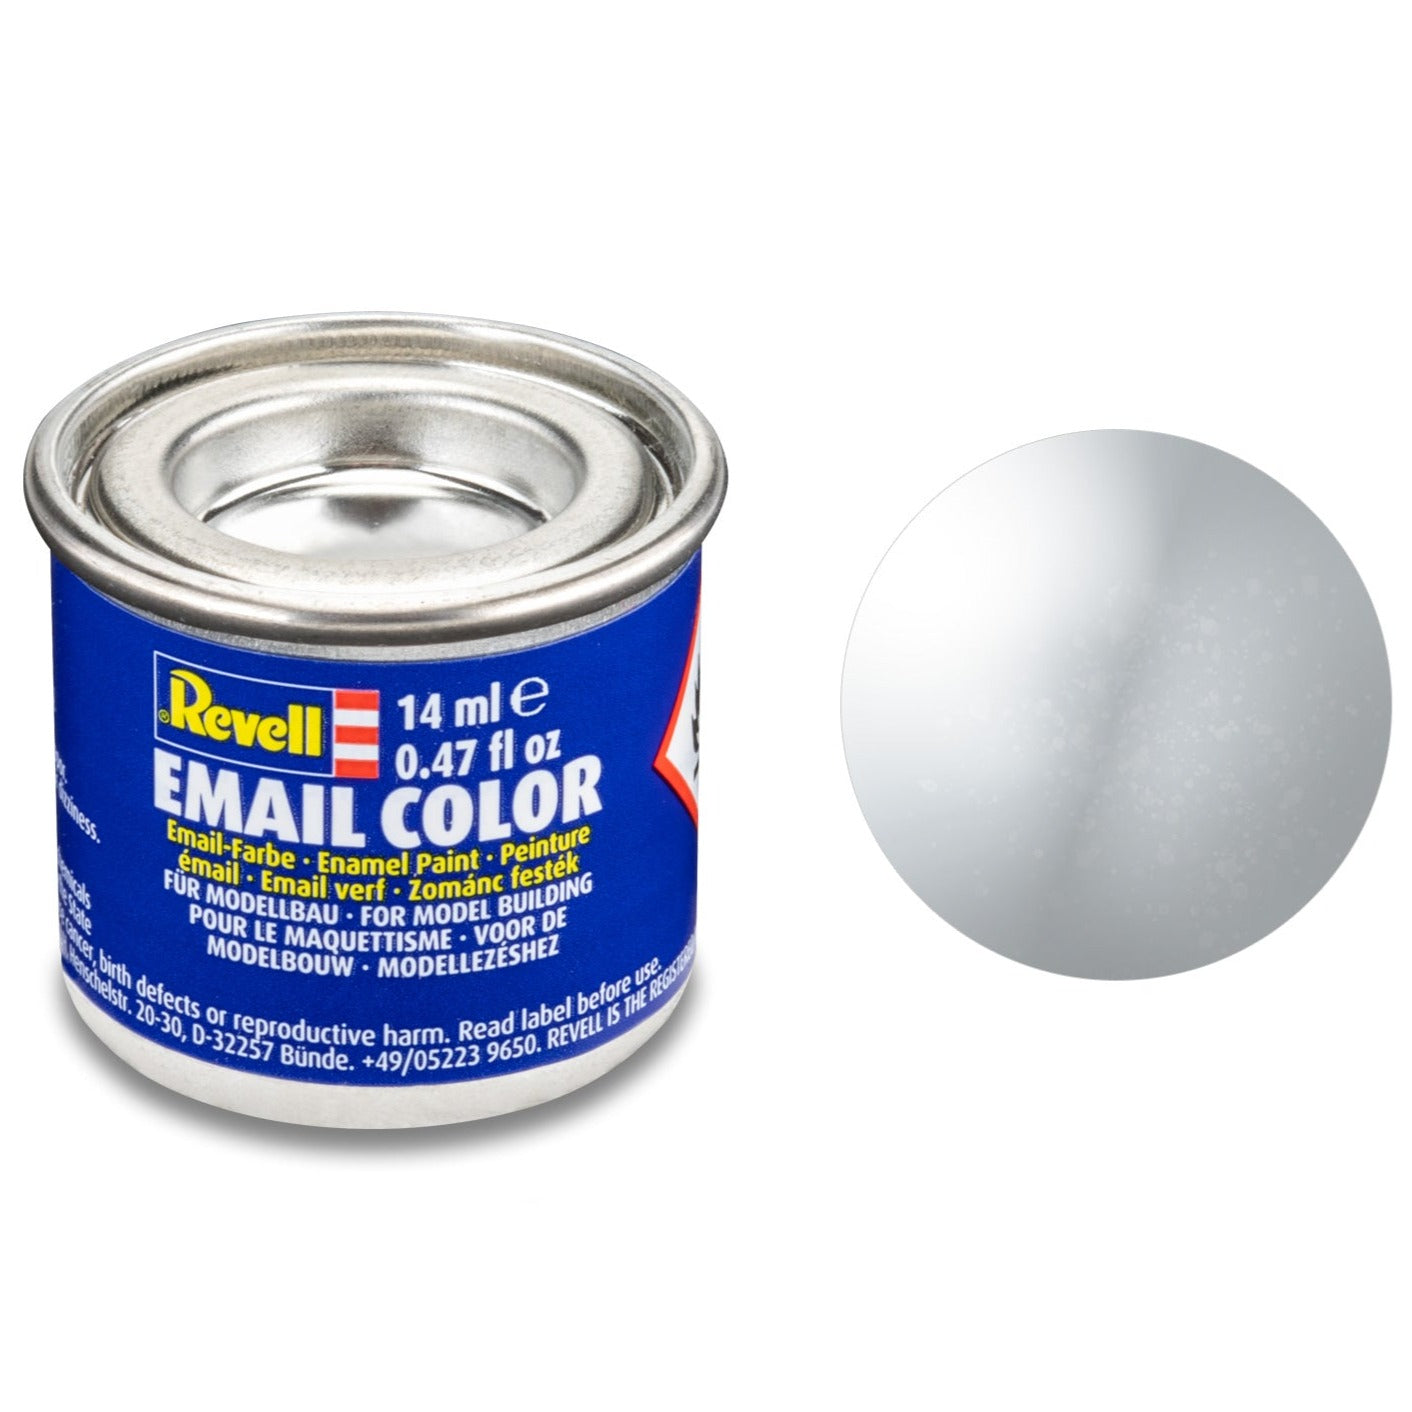 Revell Silk "White" (RAL 9010) Enamel Paint - 14ml - 32301 - Loaded Dice Barry Vale of Glamorgan CF64 3HD